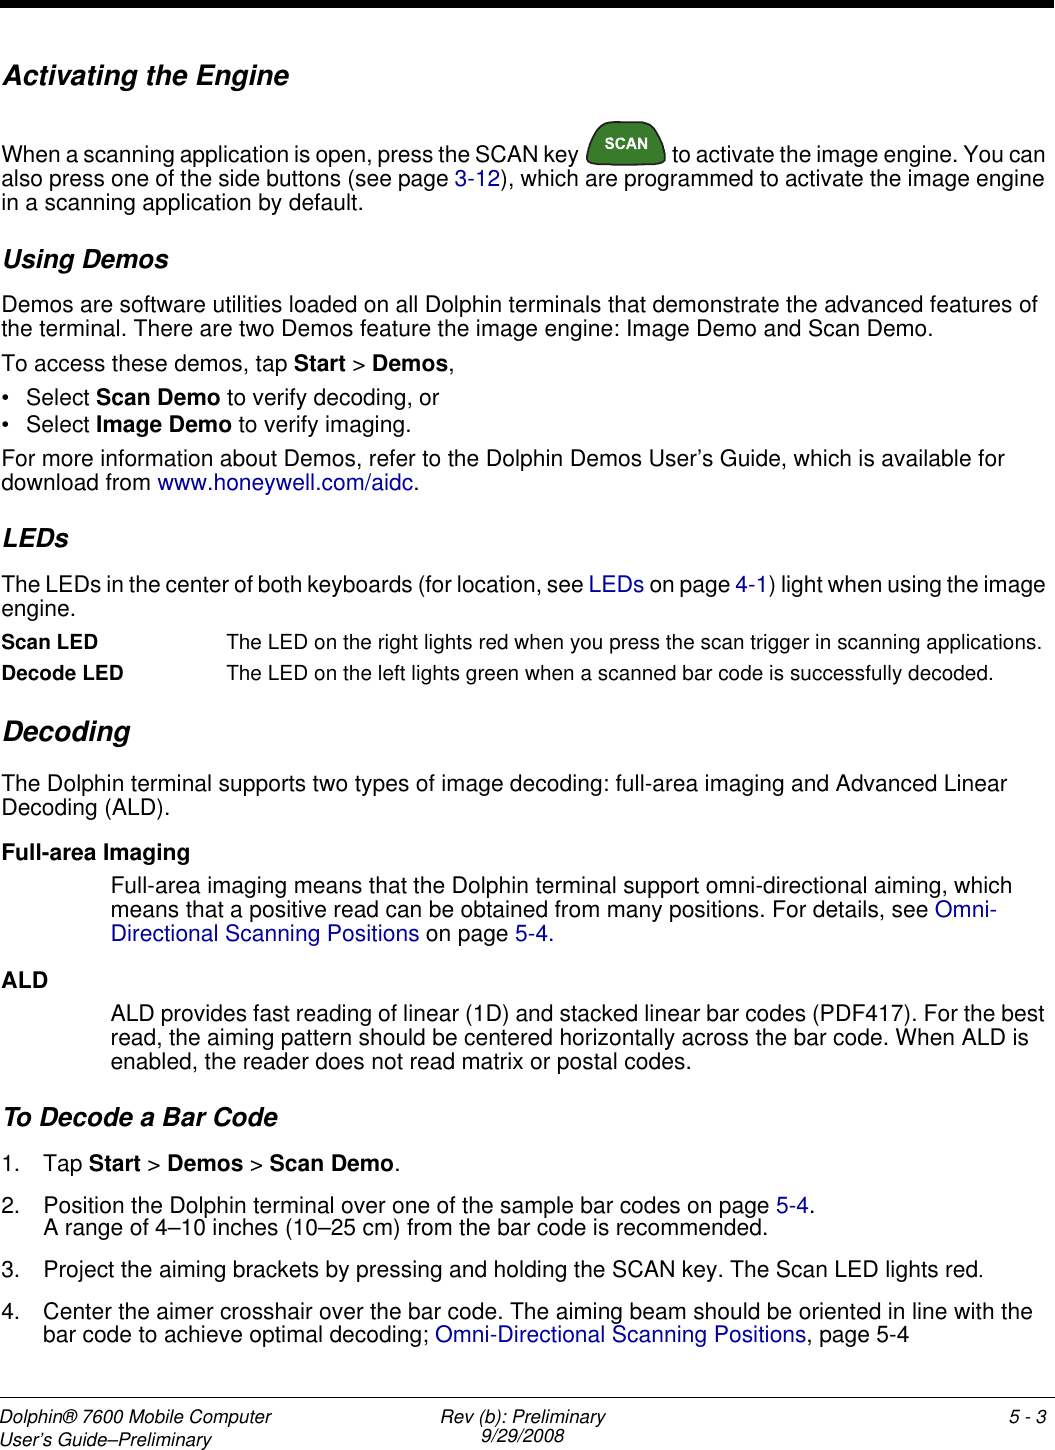 Dolphin® 7600 Mobile Computer User’s Guide–Preliminary Rev (b): Preliminary9/29/2008 5 - 3Activating the EngineWhen a scanning application is open, press the SCAN key   to activate the image engine. You can also press one of the side buttons (see page 3-12), which are programmed to activate the image engine in a scanning application by default.Using DemosDemos are software utilities loaded on all Dolphin terminals that demonstrate the advanced features of the terminal. There are two Demos feature the image engine: Image Demo and Scan Demo.To access these demos, tap Start &gt; Demos,• Select Scan Demo to verify decoding, or• Select Image Demo to verify imaging.For more information about Demos, refer to the Dolphin Demos User’s Guide, which is available for download from www.honeywell.com/aidc.LEDsThe LEDs in the center of both keyboards (for location, see LEDs on page 4-1) light when using the image engine.Scan LED  The LED on the right lights red when you press the scan trigger in scanning applications.Decode LED  The LED on the left lights green when a scanned bar code is successfully decoded.DecodingThe Dolphin terminal supports two types of image decoding: full-area imaging and Advanced Linear Decoding (ALD).Full-area ImagingFull-area imaging means that the Dolphin terminal support omni-directional aiming, which means that a positive read can be obtained from many positions. For details, see Omni-Directional Scanning Positions on page 5-4. ALDALD provides fast reading of linear (1D) and stacked linear bar codes (PDF417). For the best read, the aiming pattern should be centered horizontally across the bar code. When ALD is enabled, the reader does not read matrix or postal codes.To Decode a Bar Code1. Tap Start &gt; Demos &gt; Scan Demo.2. Position the Dolphin terminal over one of the sample bar codes on page 5-4.A range of 4–10 inches (10–25 cm) from the bar code is recommended. 3. Project the aiming brackets by pressing and holding the SCAN key. The Scan LED lights red.4. Center the aimer crosshair over the bar code. The aiming beam should be oriented in line with the bar code to achieve optimal decoding; Omni-Directional Scanning Positions, page 5-4